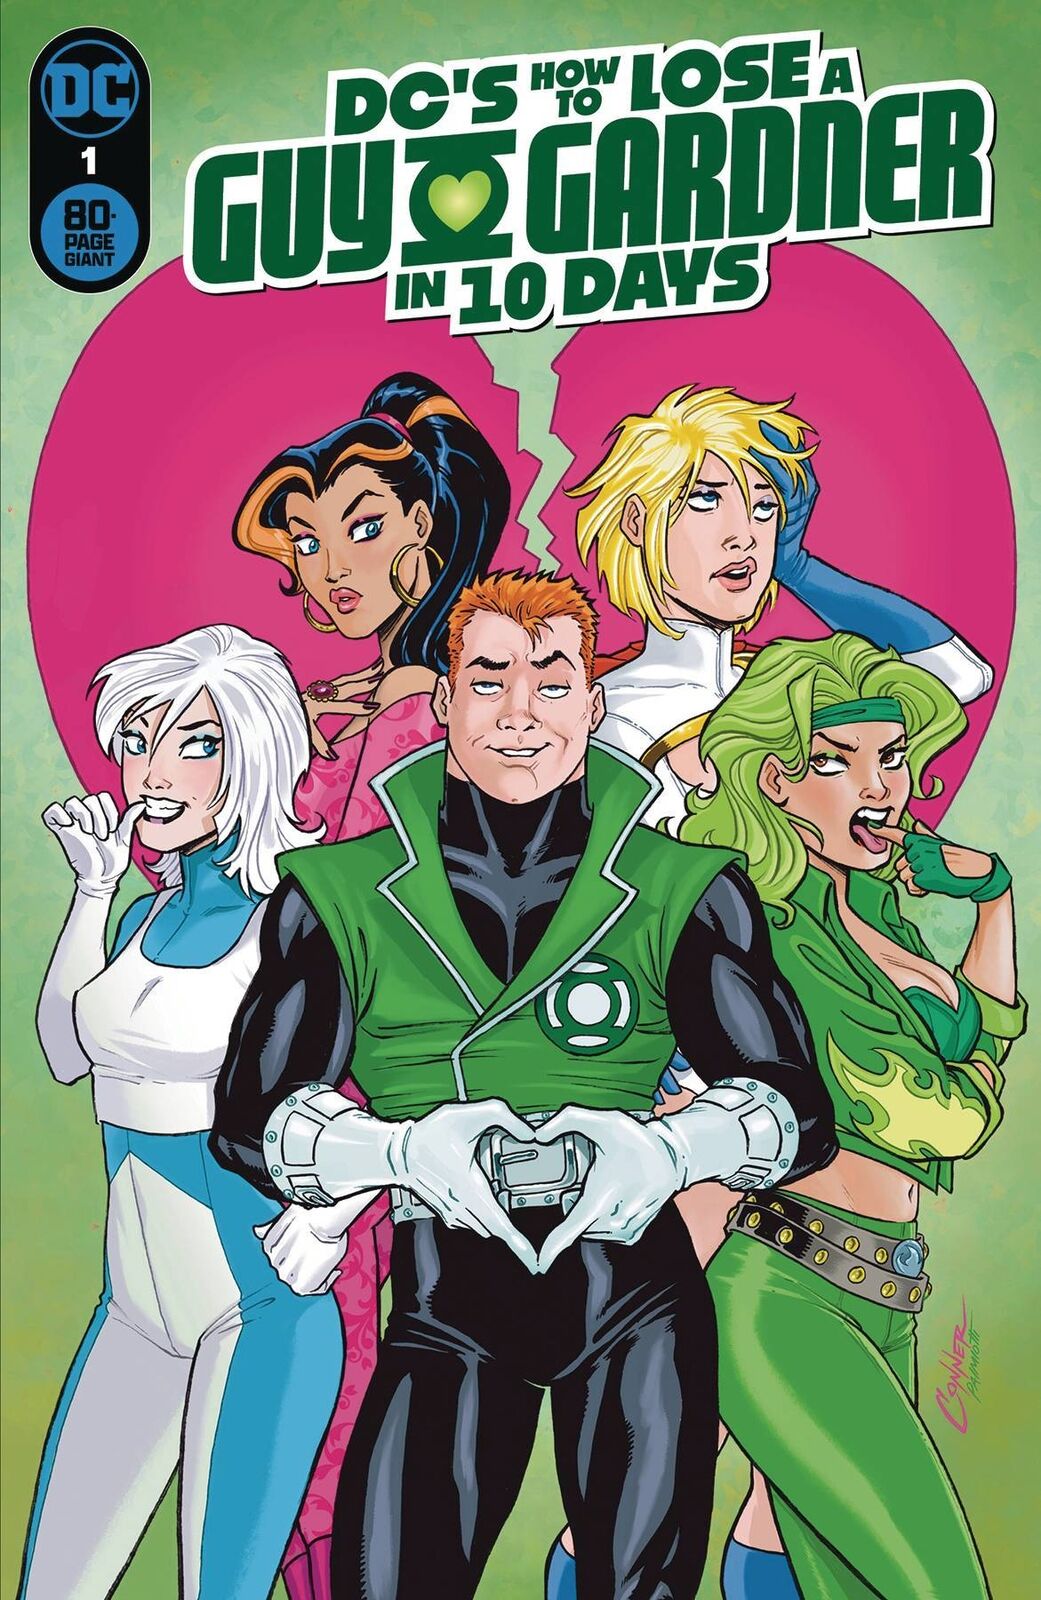 DCS HOW TO LOSE A GUY GARDNER IN 10 DAYS #1 (ONE SHOT) CVR A AMANDA CONNER DC